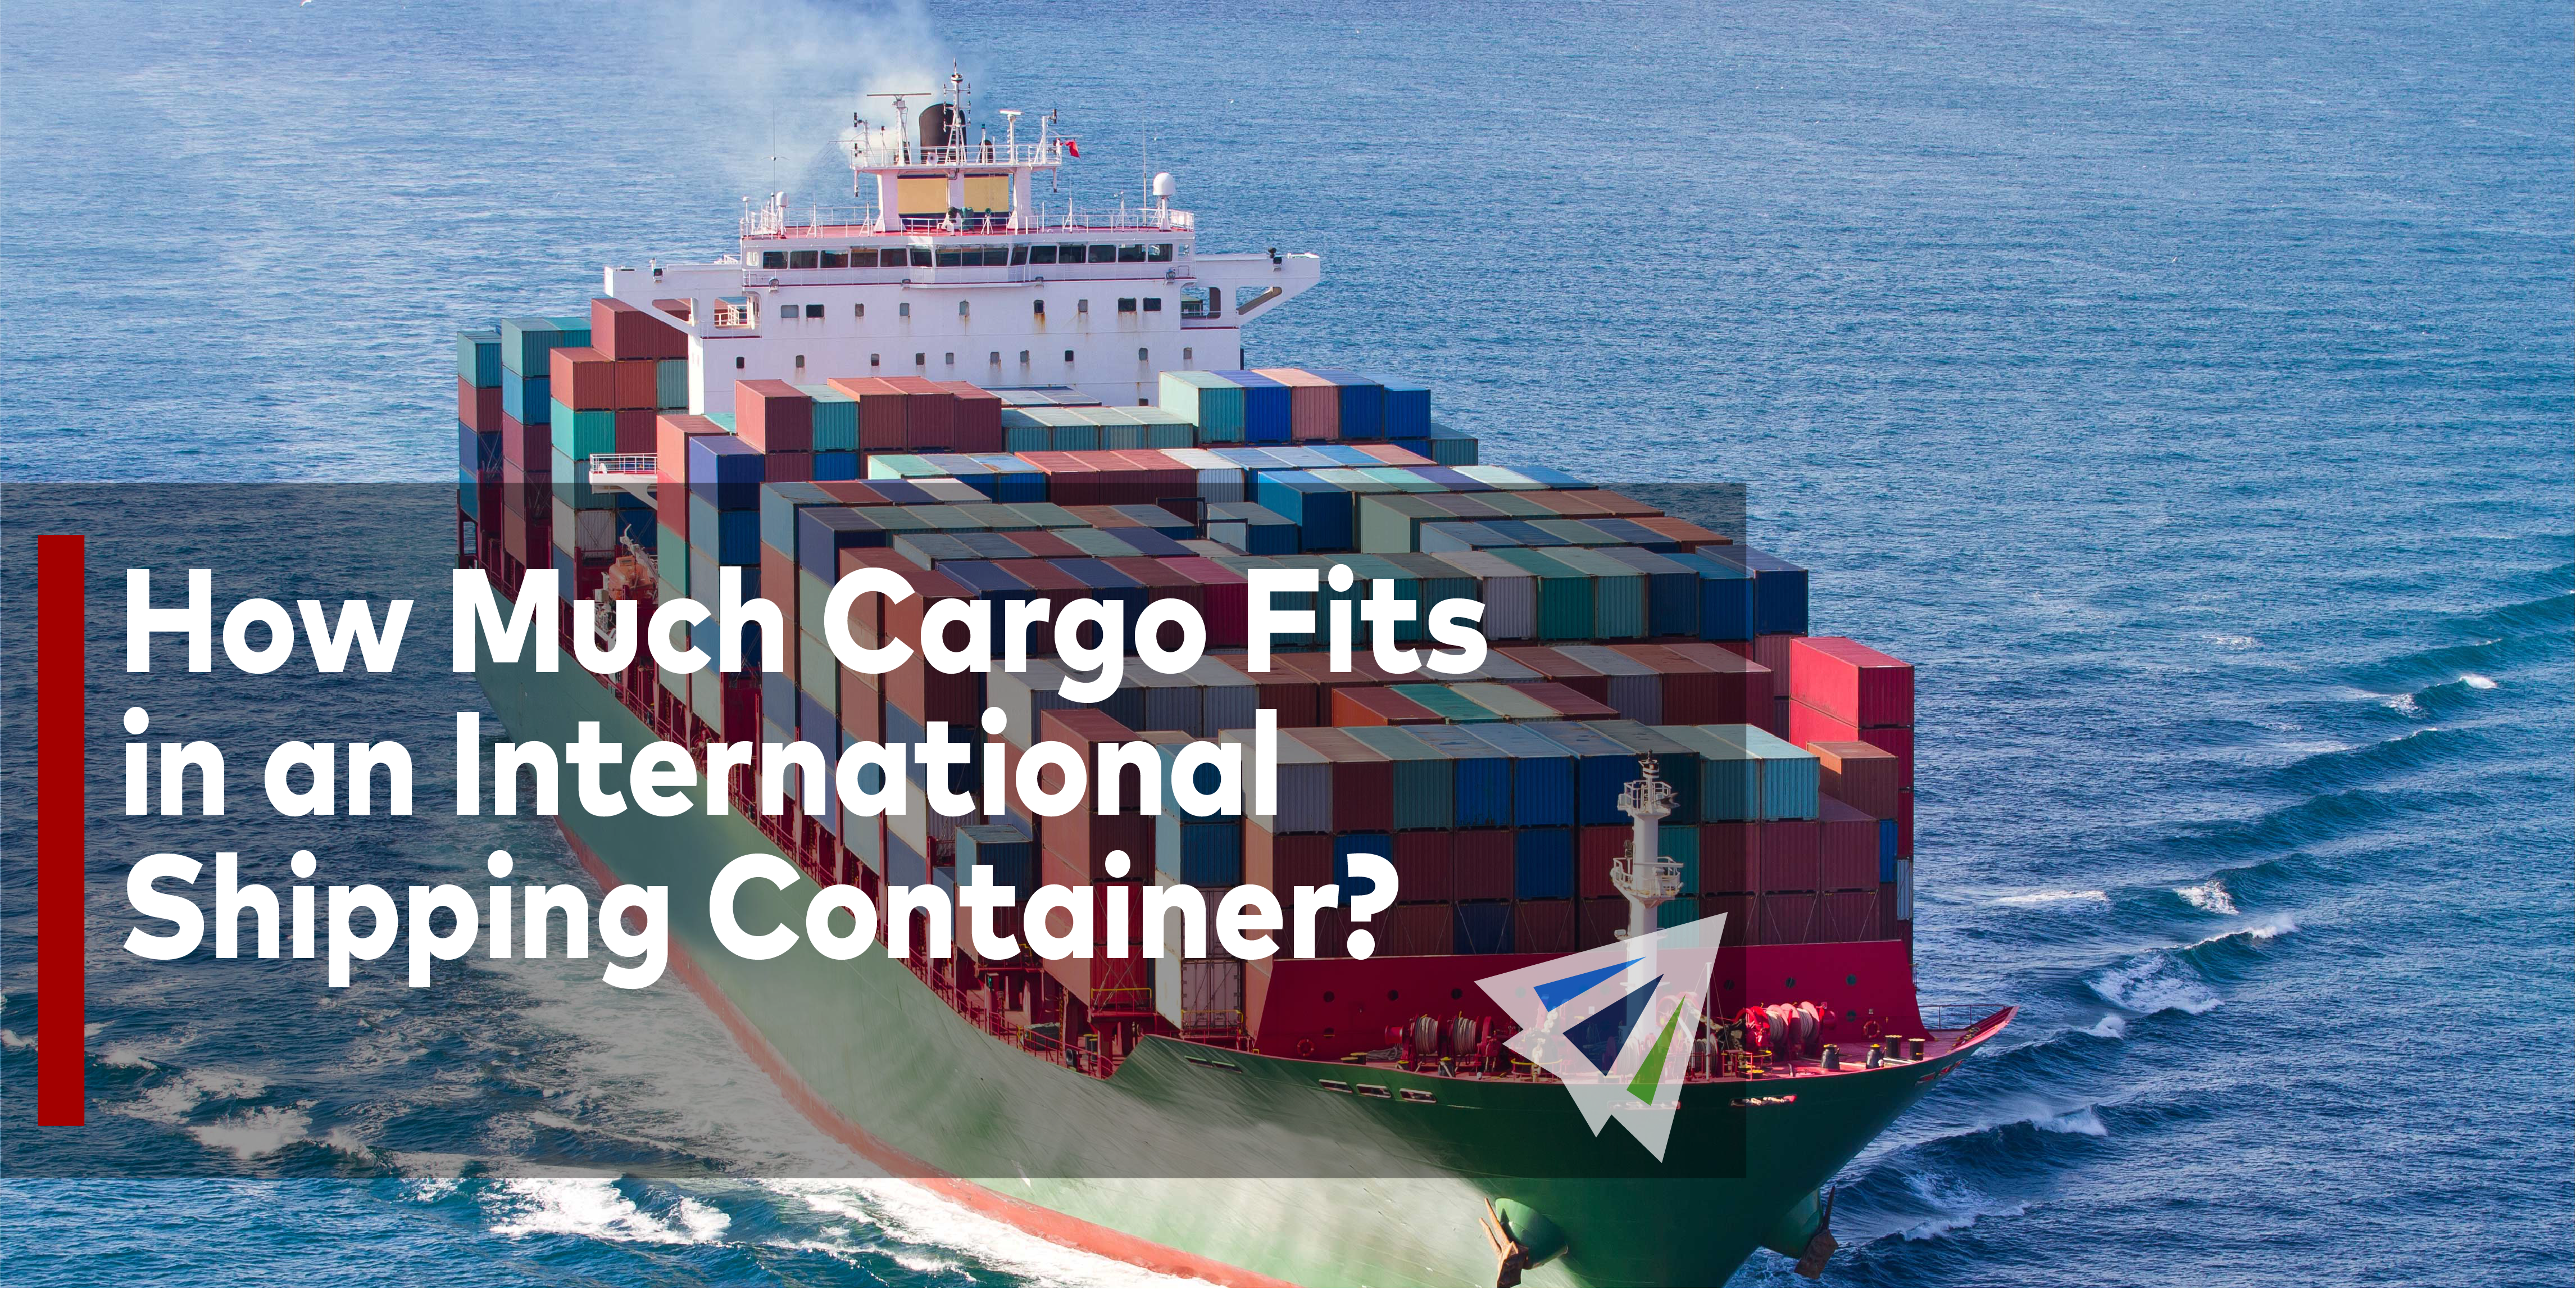 How Much Cargo Fits in an International Shipping Container?